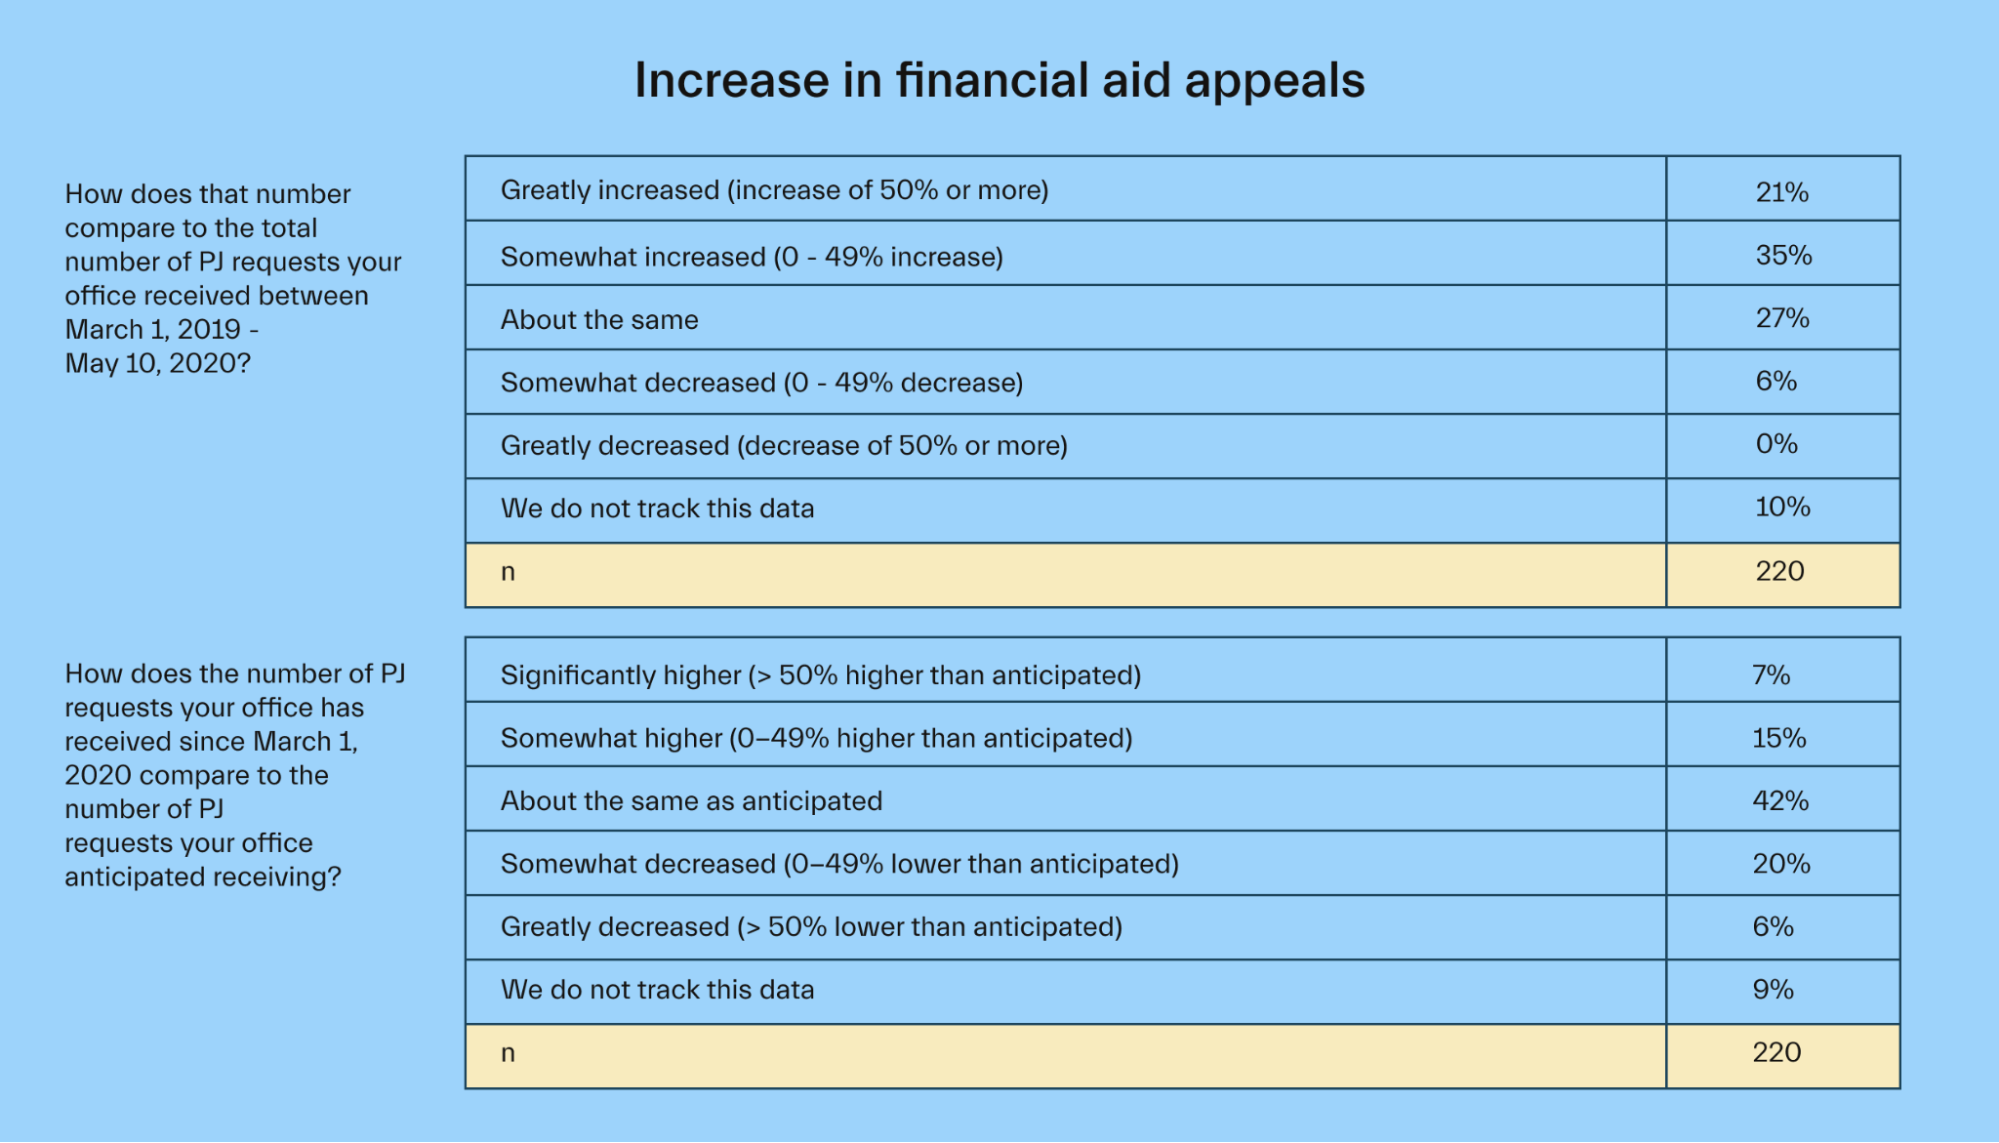 Increase in financial aid appeals